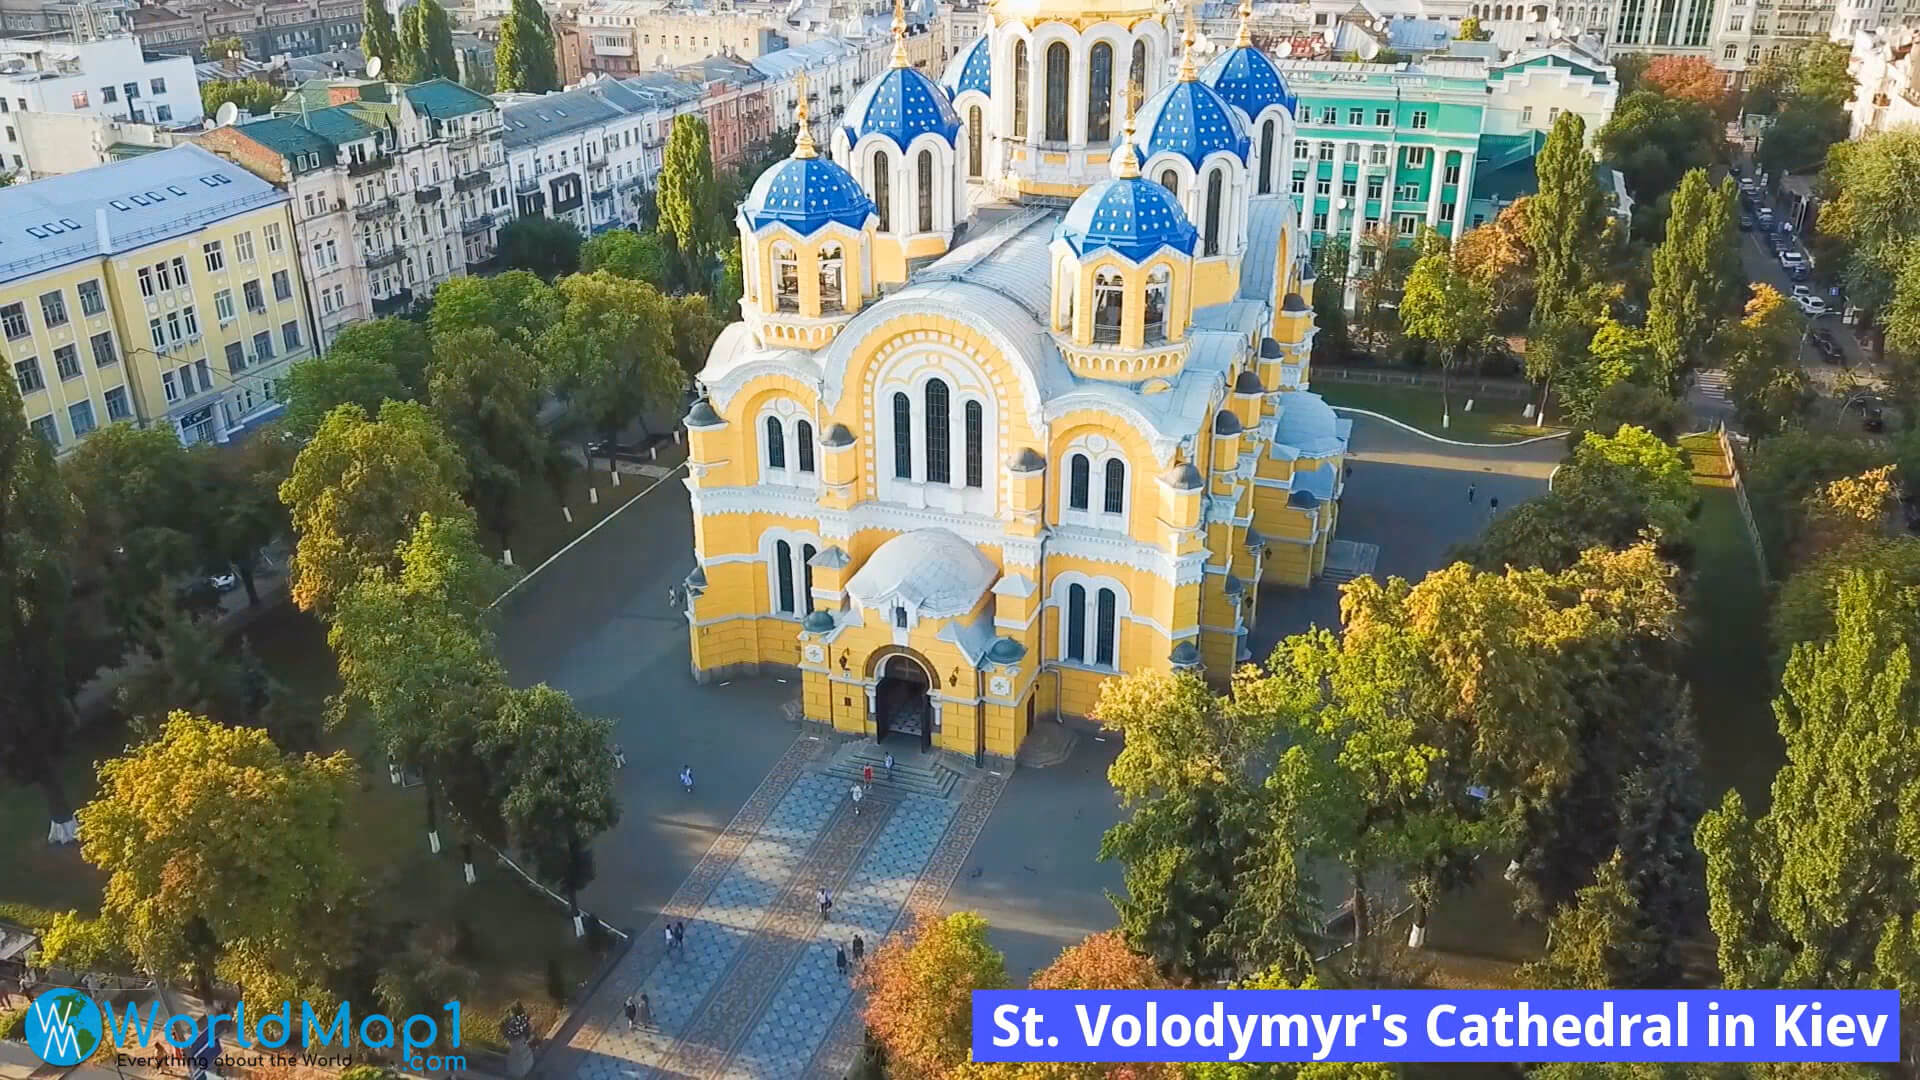 St Volodymyr's Cathedral in Kiev